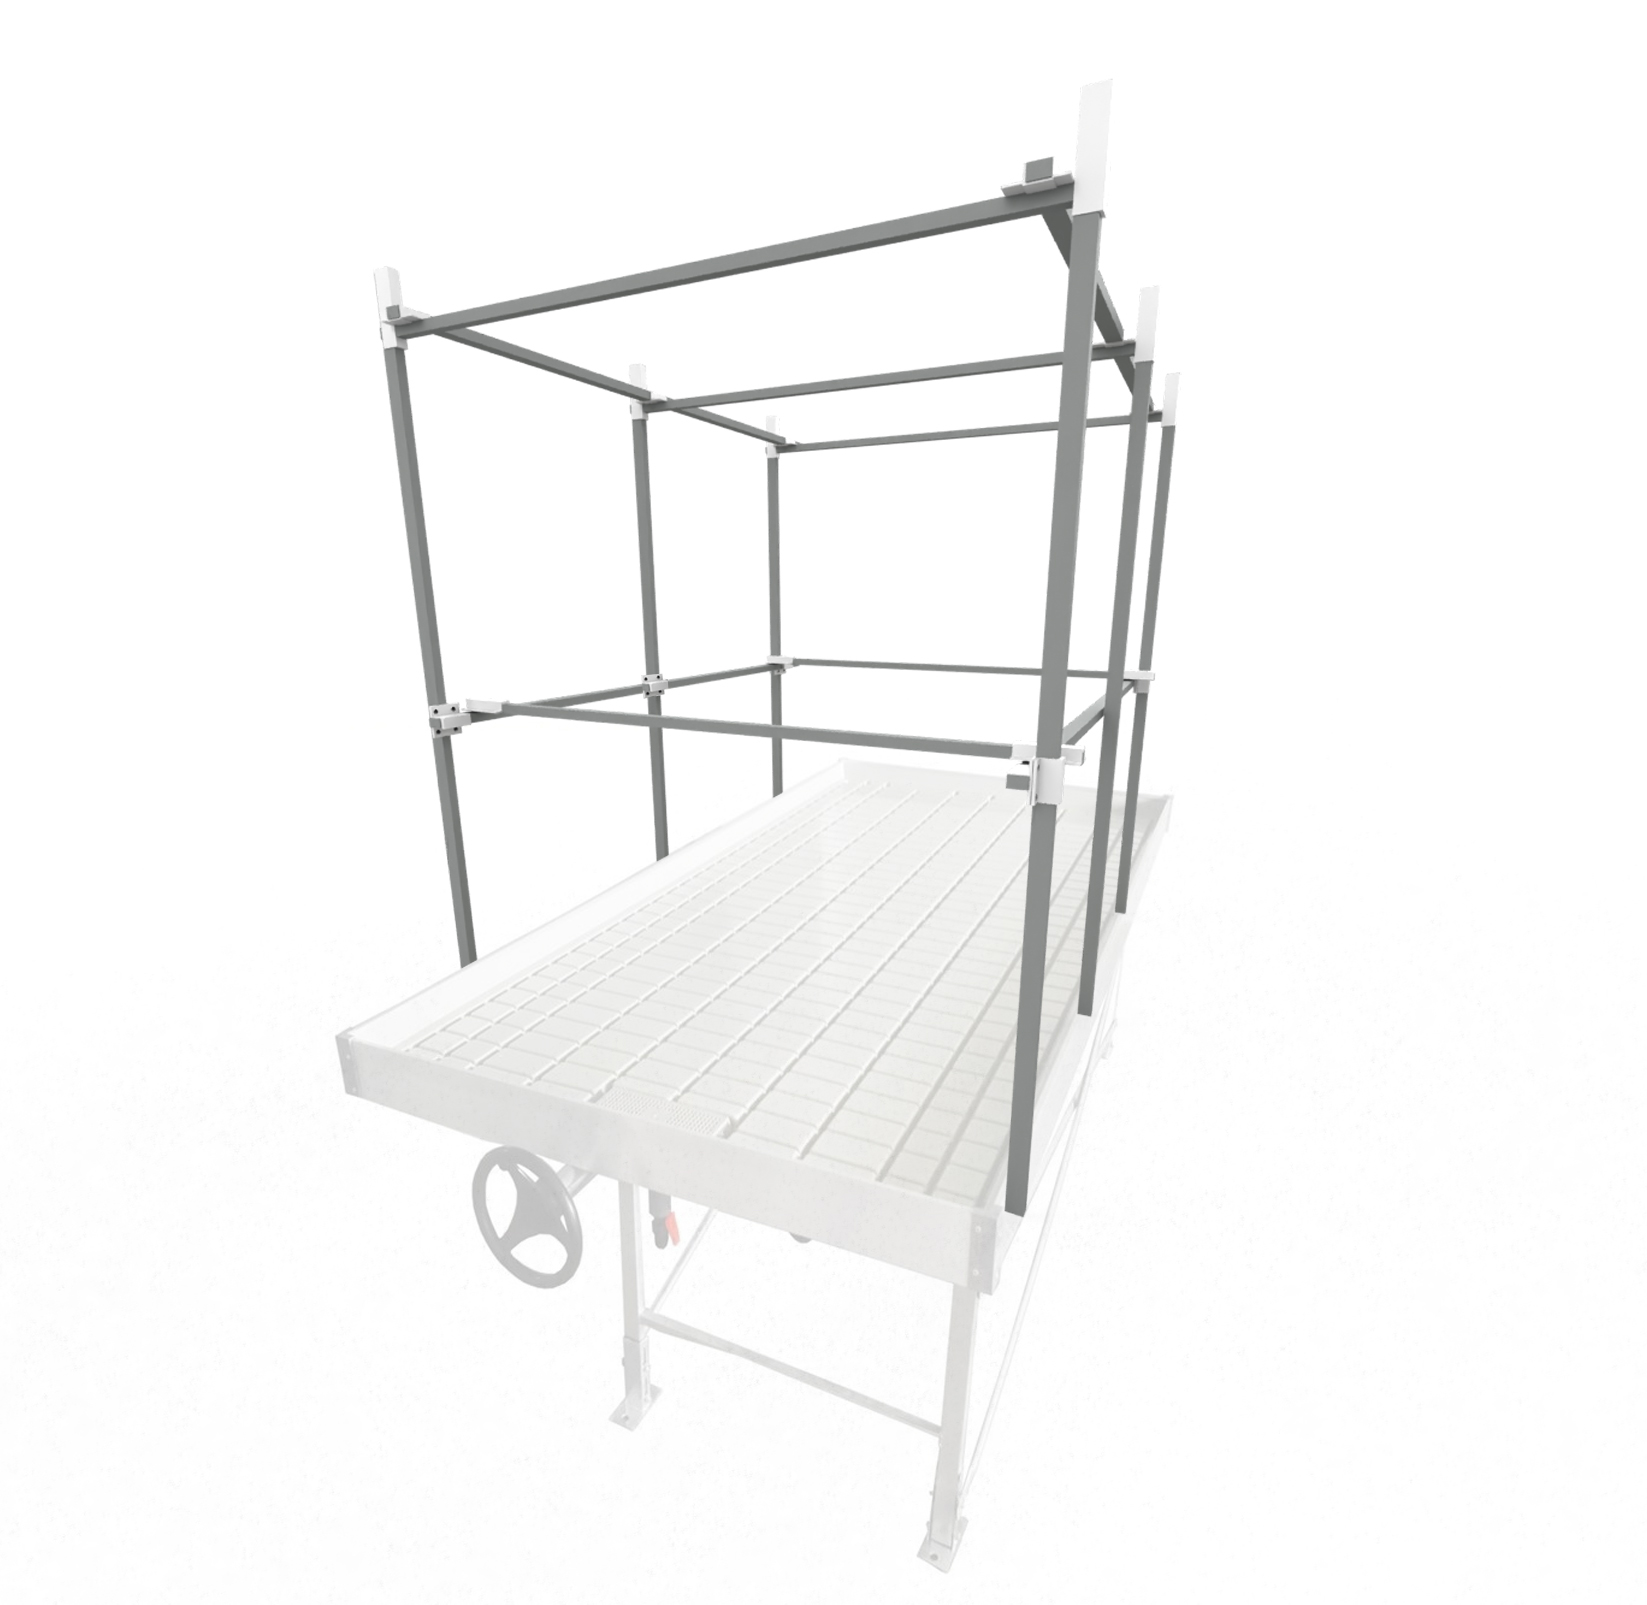 Lamp holder and Scrog for Rolling Bench - 1.53x3.66m - Platinium Hydroponics